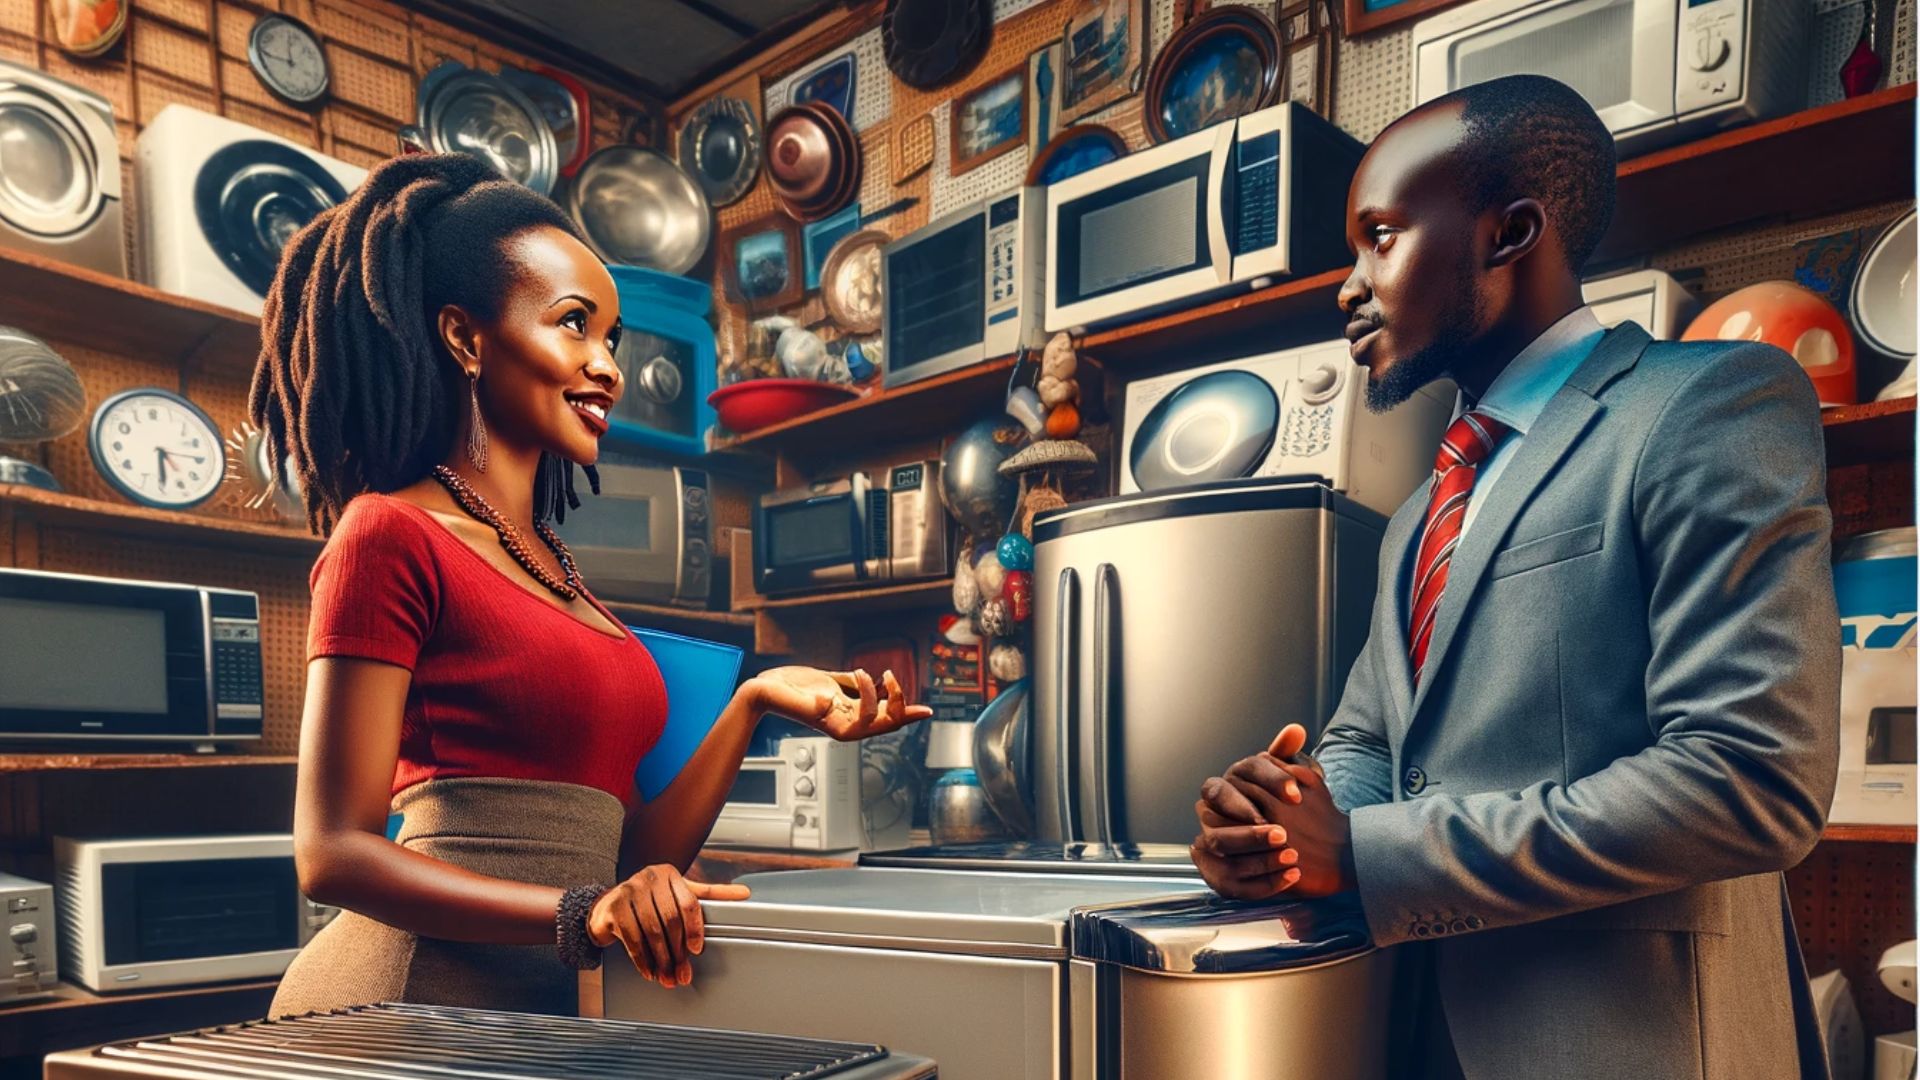 A Comprehensive Guide on Where to Efficiently Buy and Sell Used Home Appliances in Kenya